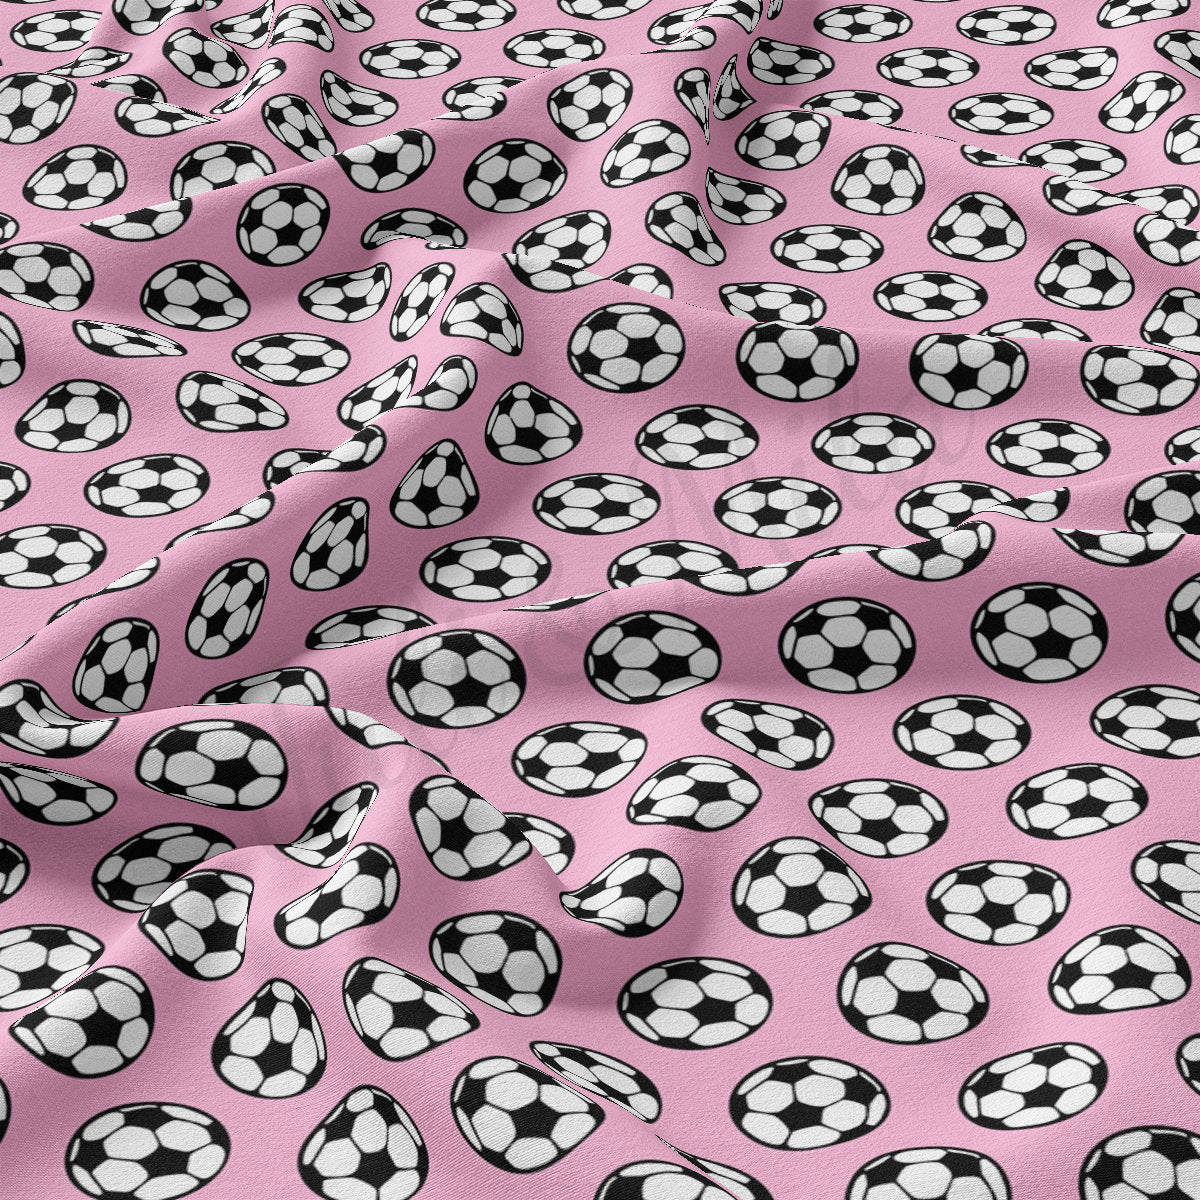 DBP Fabric Double Brushed Polyester DBP2465 Soccer